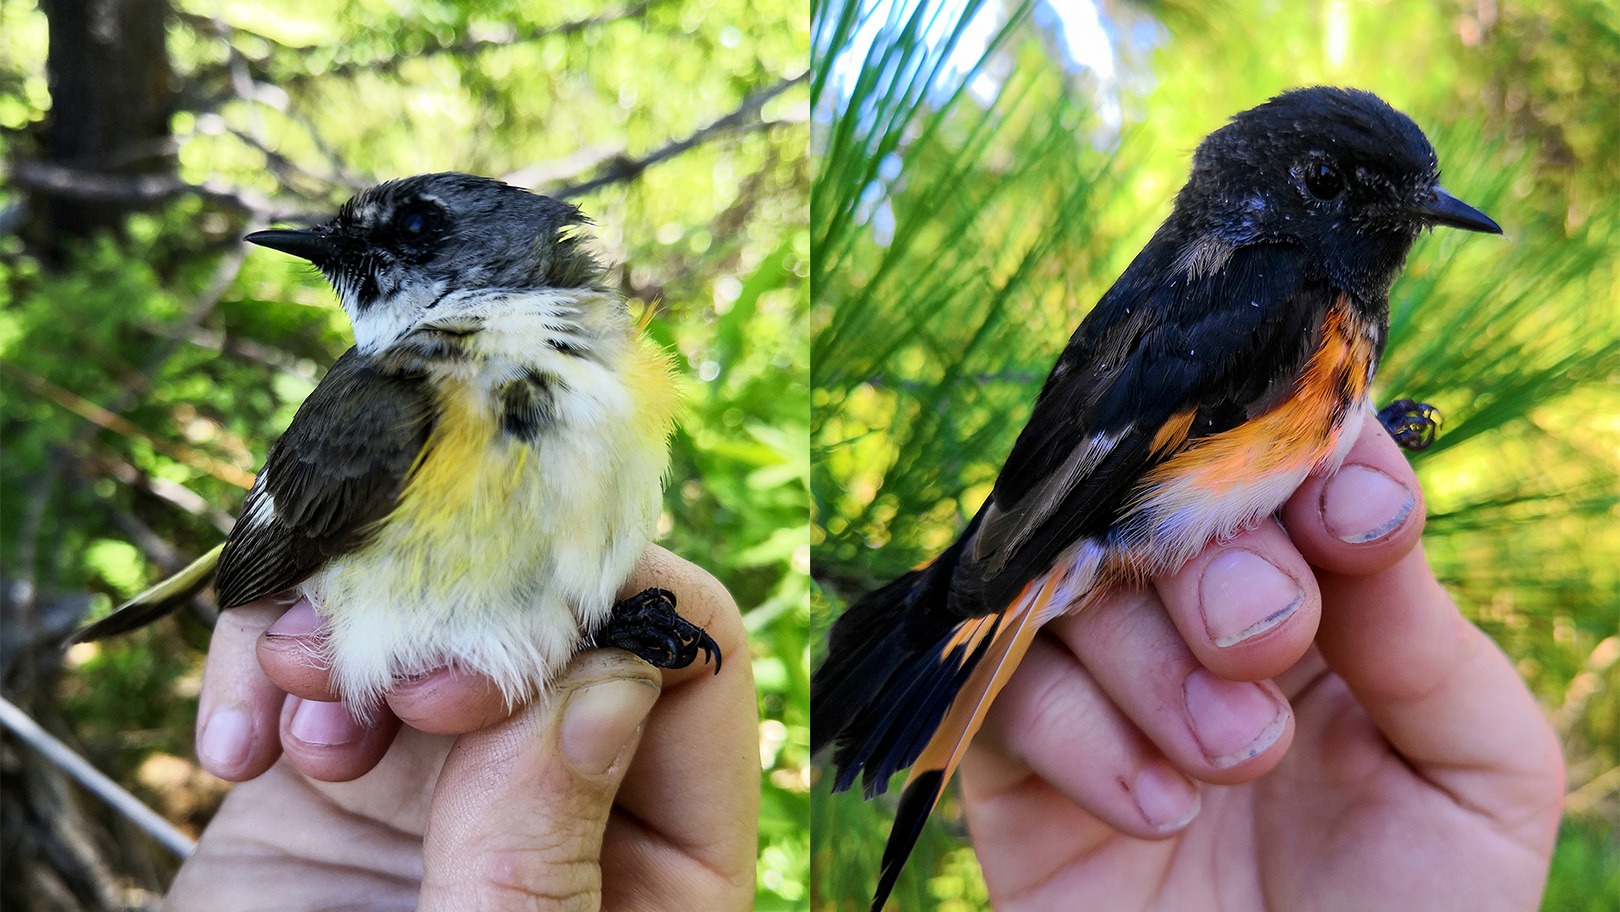 A month can make a big difference in the bird world! Pictured: an American redstart captured at Big Meadow on June 30, before molting (left), and recaptured on July 30, after molting (right).